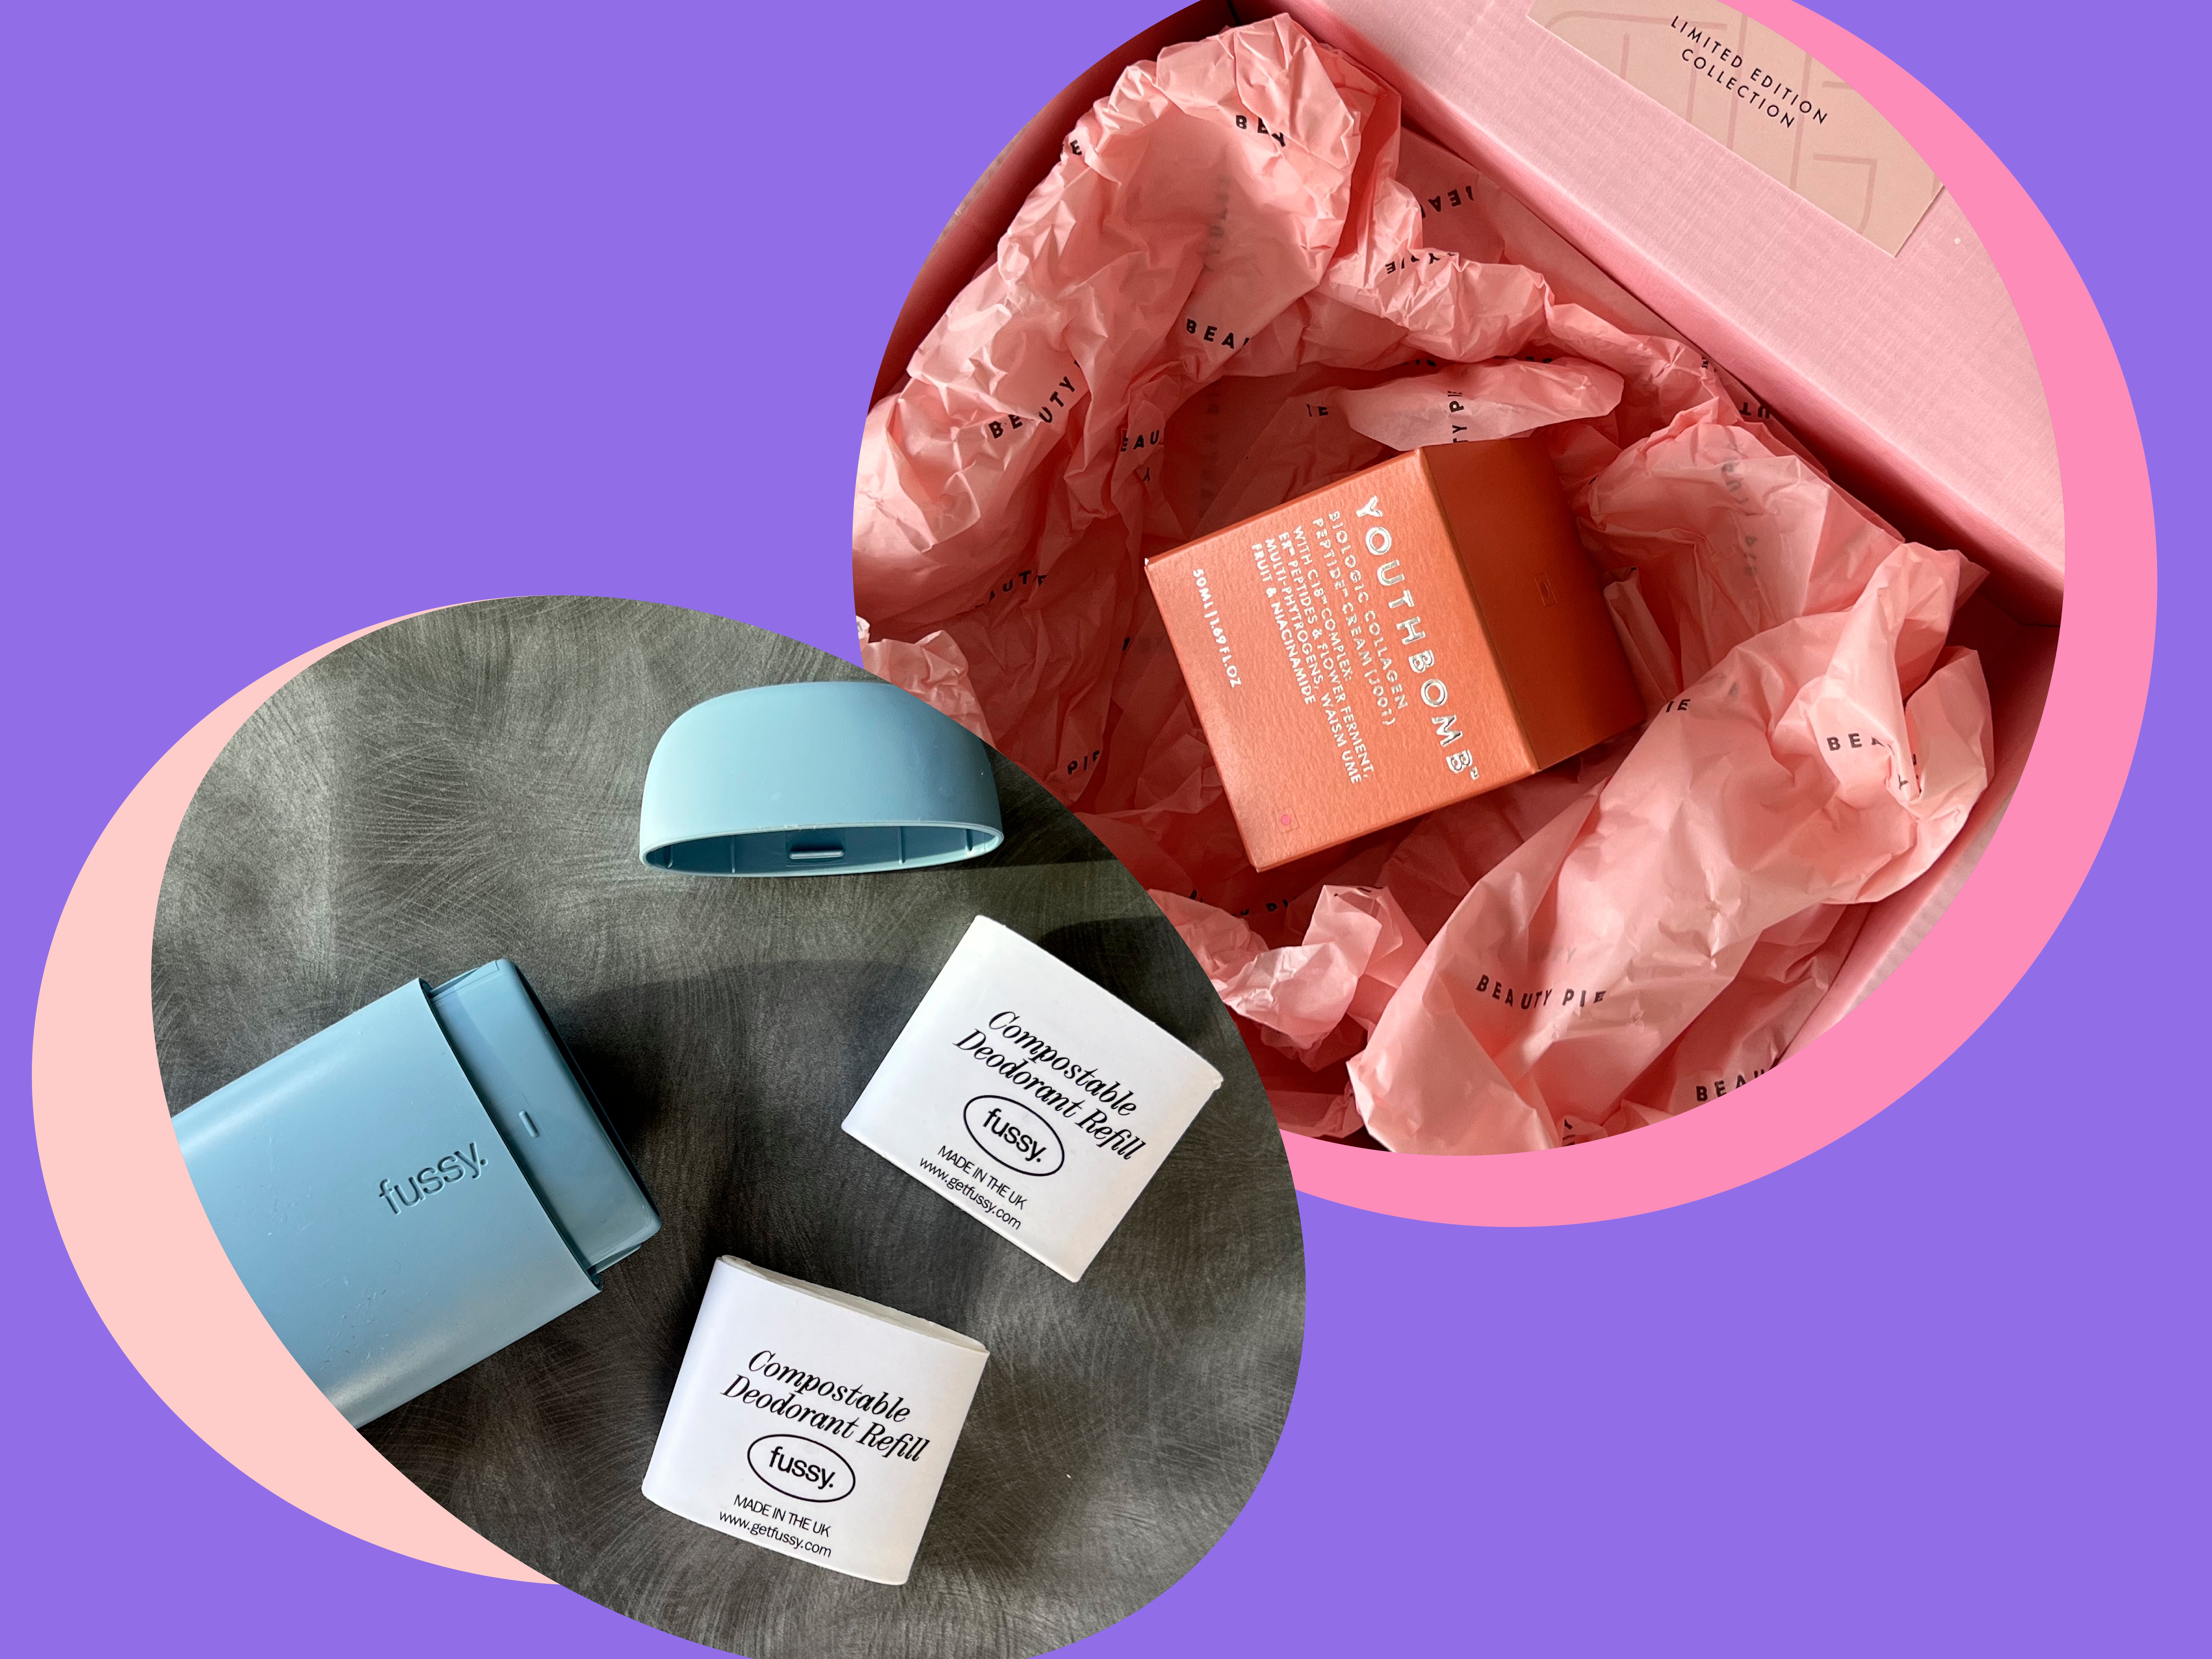 10 best beauty subscription boxes: Monthly skincare and make-up treats worth signing up for